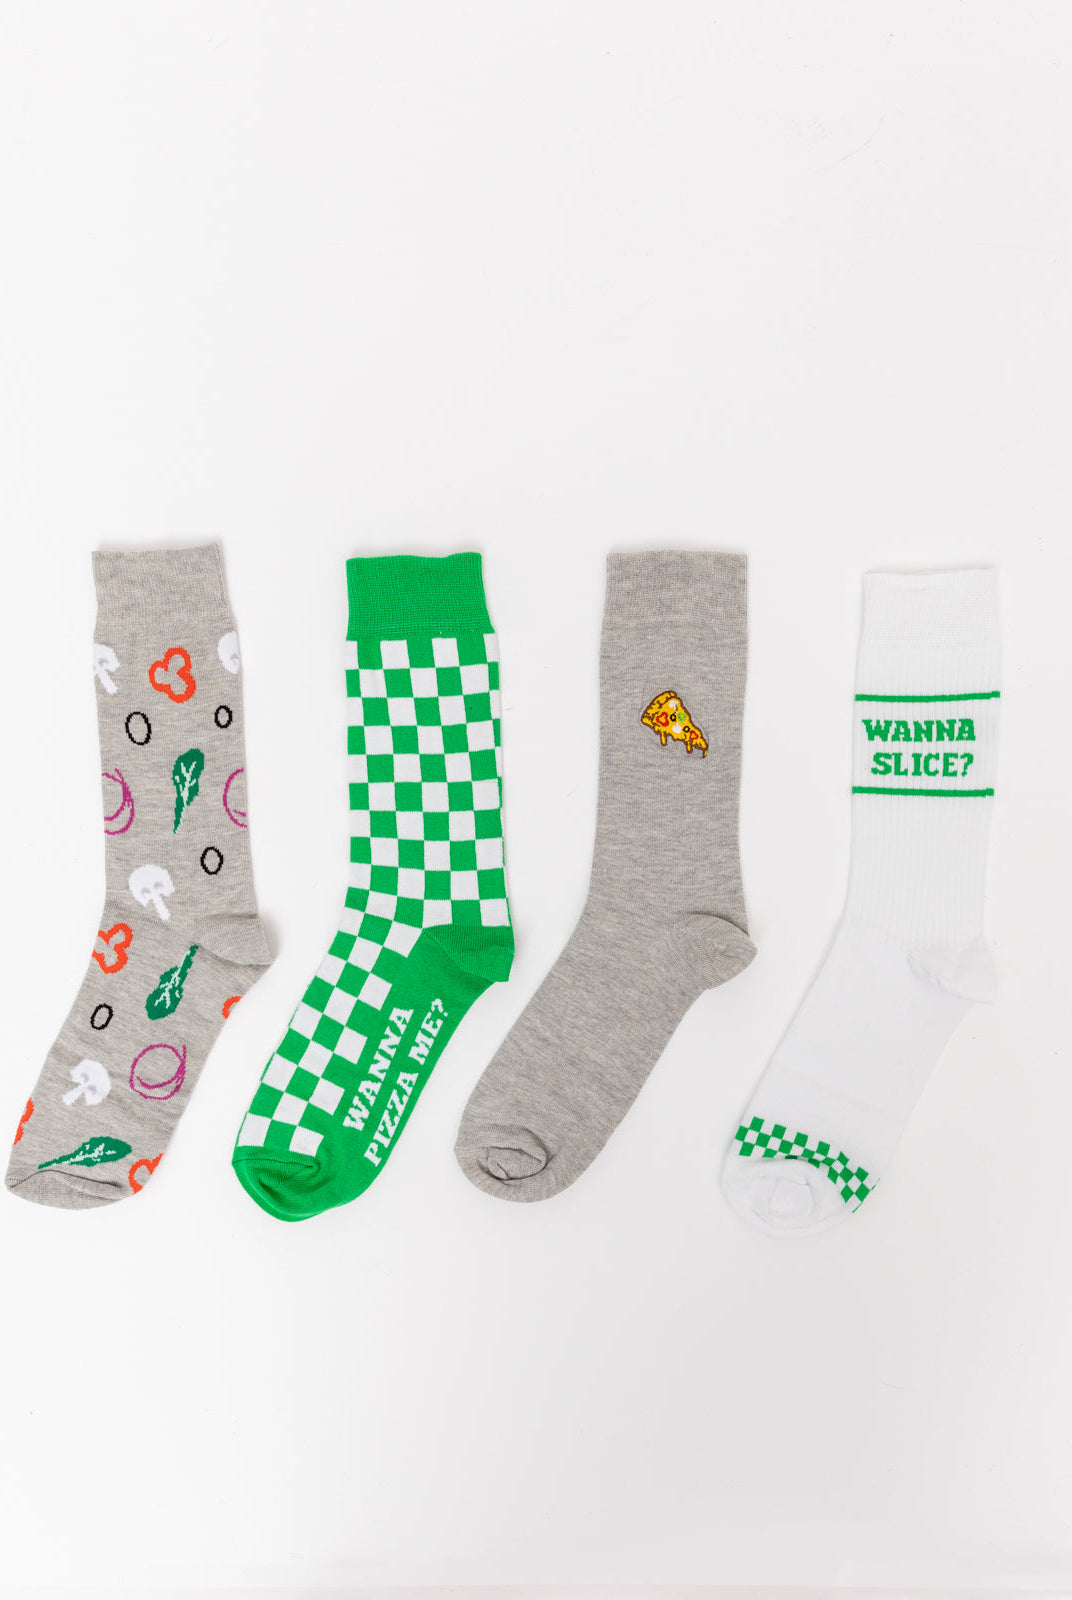 Veggie Pizza Sock Set-Accessories- Simply Simpson's Boutique is a Women's Online Fashion Boutique Located in Jupiter, Florida